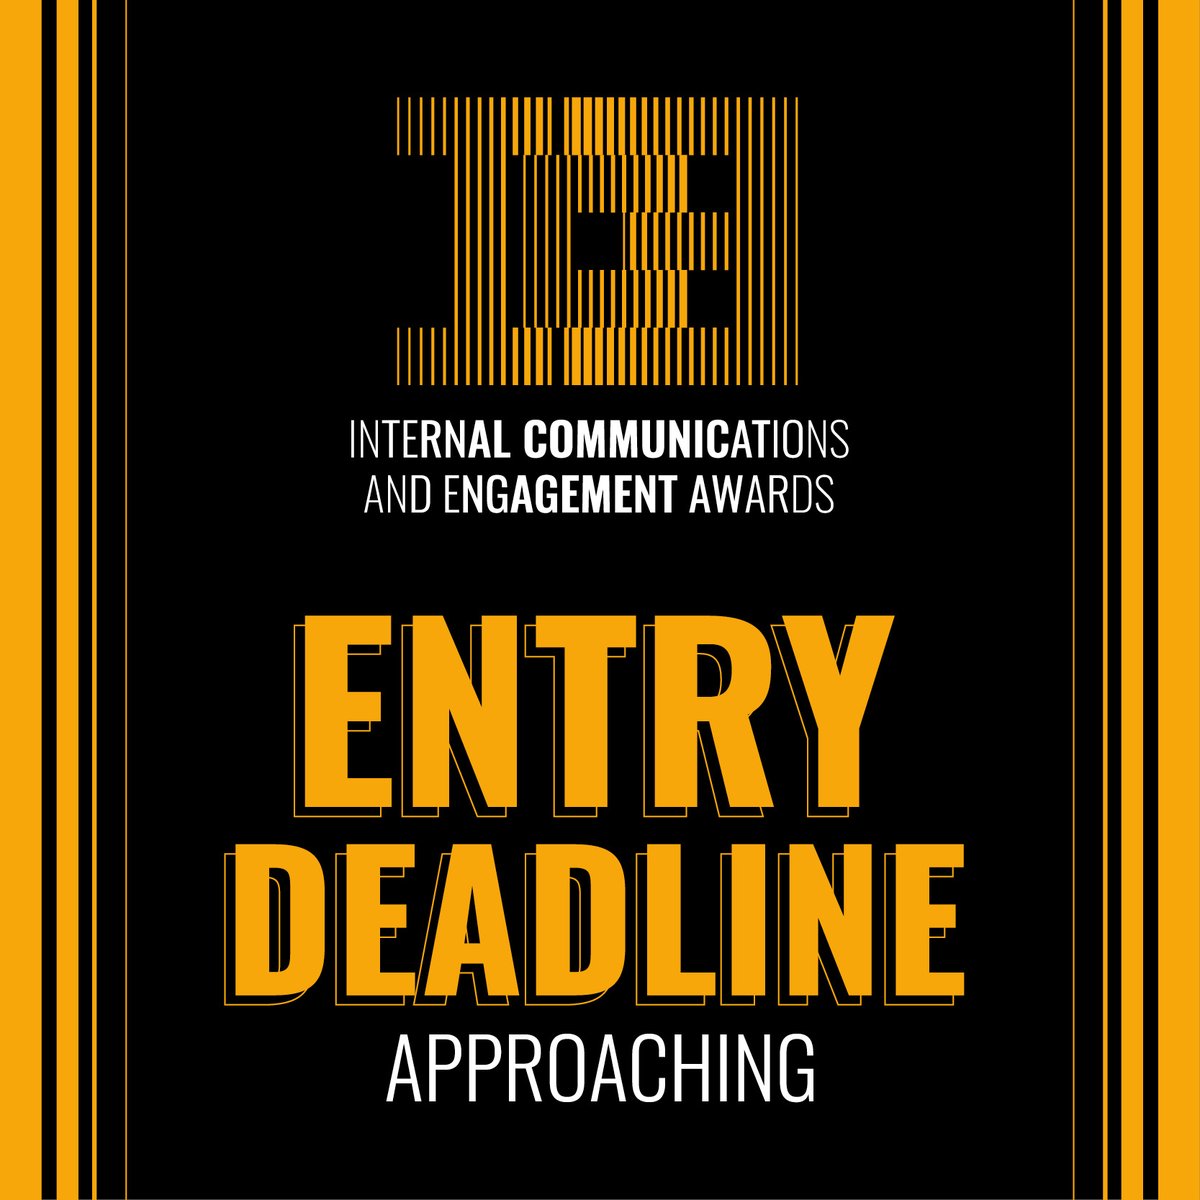 The Internal Communications and Engagement Awards entry deadline is this Friday 8 December!⏰

Need more time to craft your submissions?  Contact  Sophia at sophia.richards@communicatemagazine.co.uk with any extension requests!

#ICEawards #internalcommunications #corporatecomms